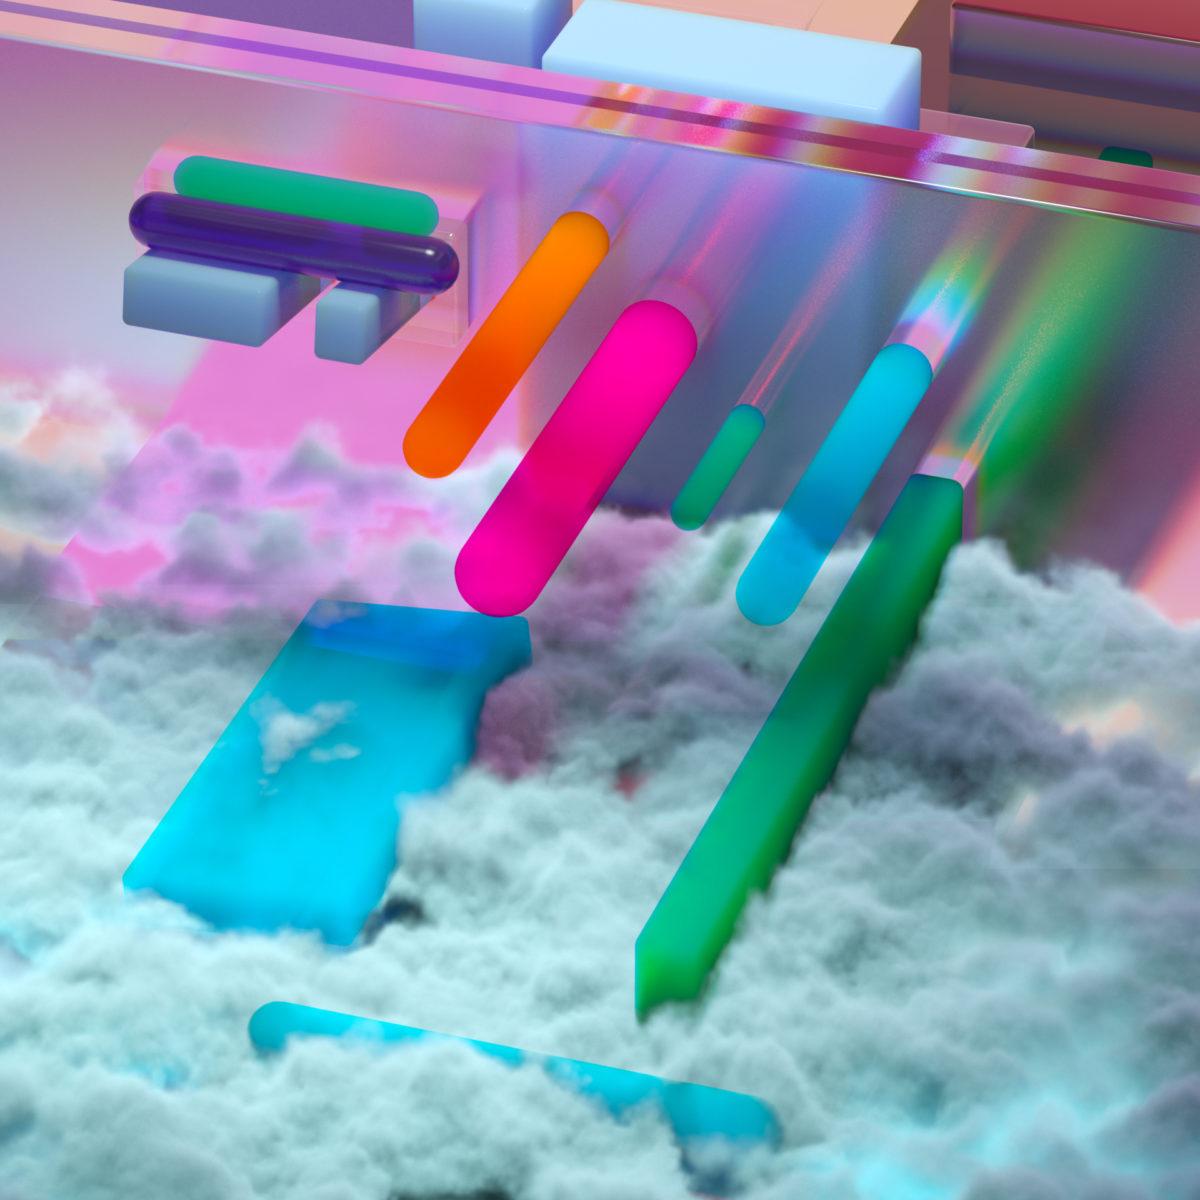 A 3D art image of multi colored cylinders emerging from pink incandescent glass into a puff of blue clouds.